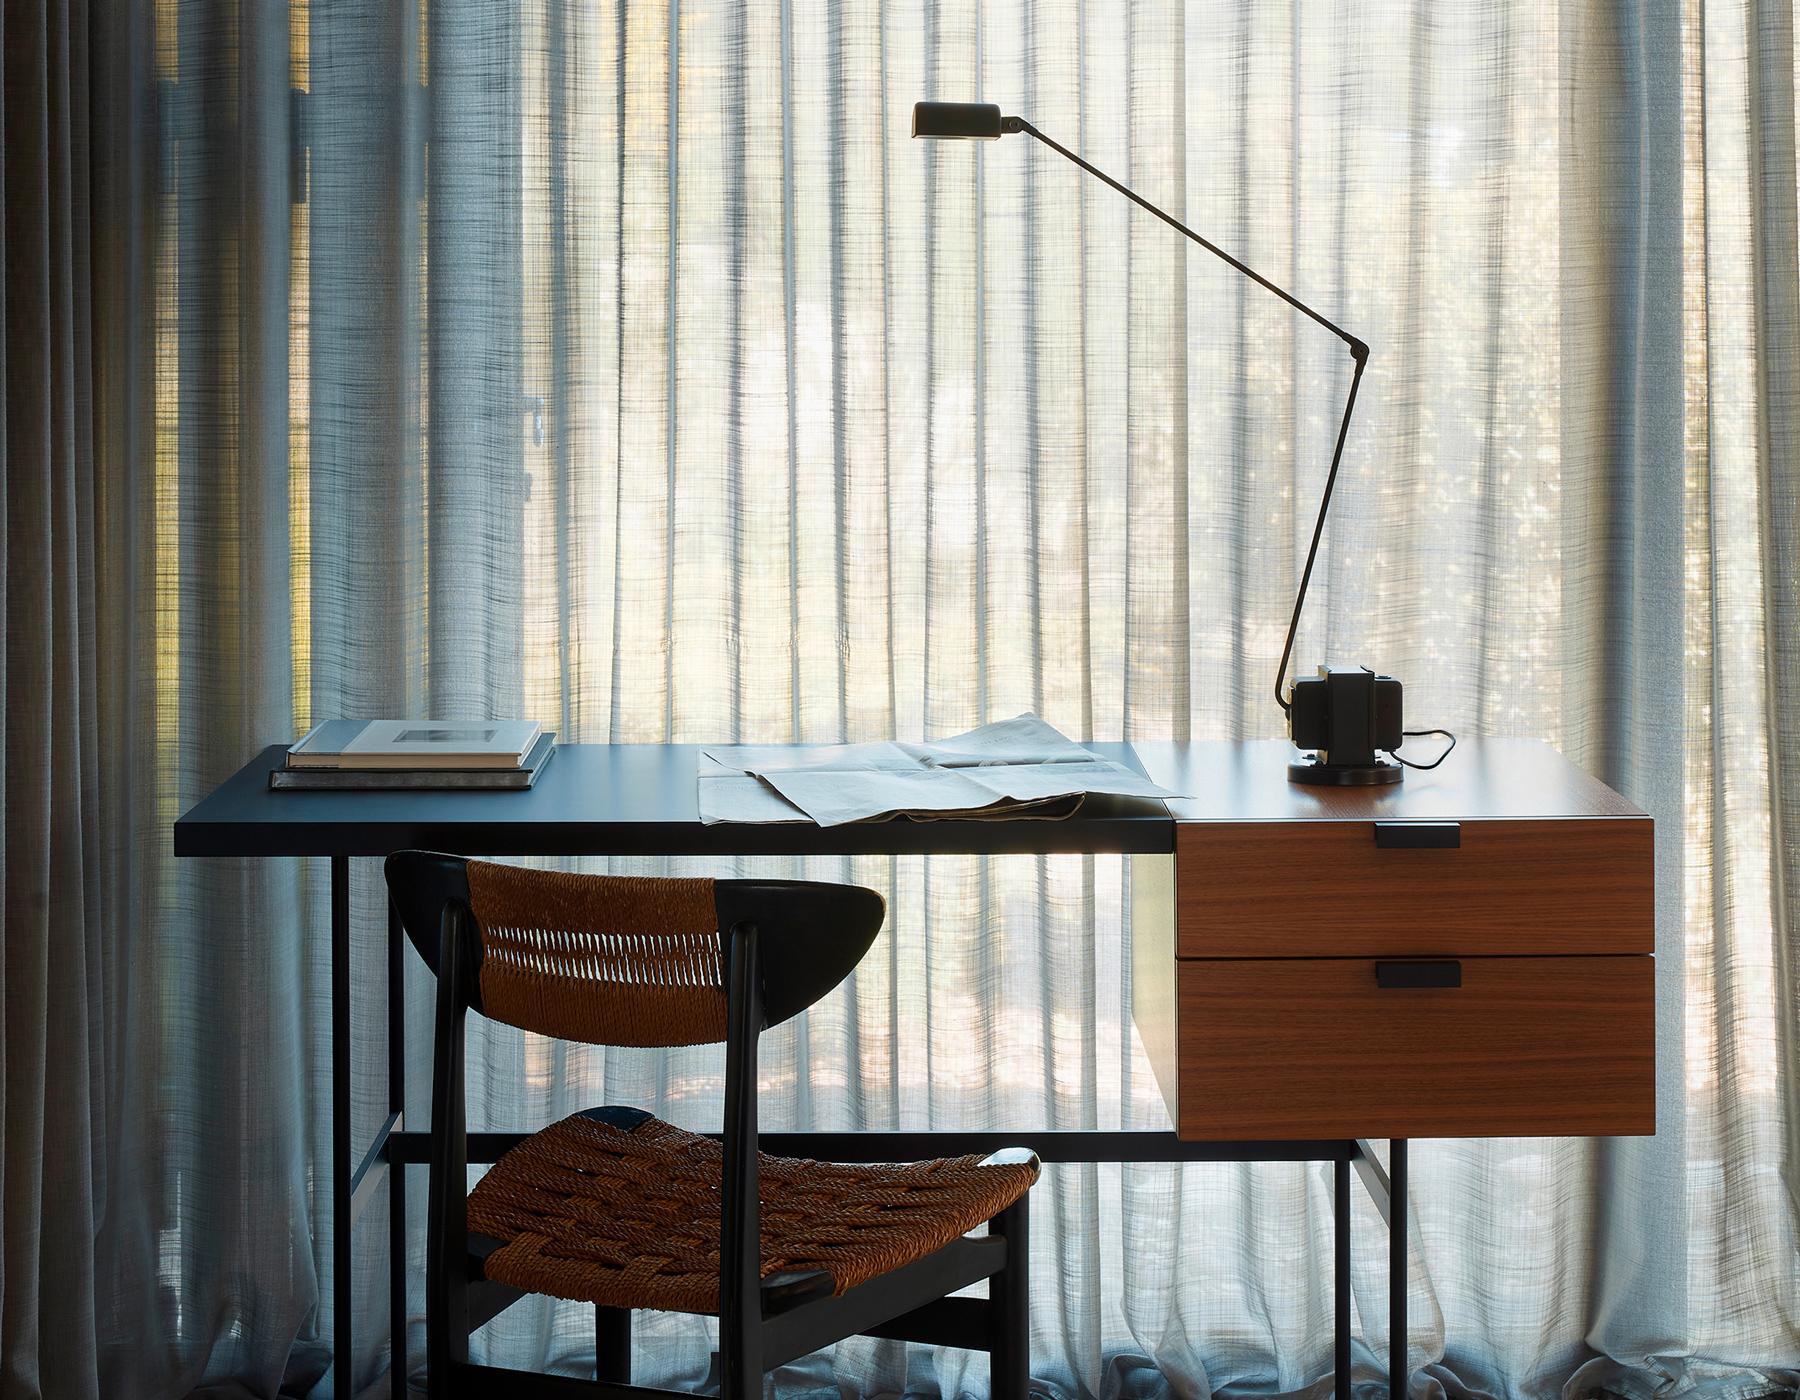 Lumina Daphine LED table lamp in soft touch black by Tommaso Cimini

Undisputed emblem of elegance and functionality, the Daphine represents the essence of Lumina.
The idea behind the creation of the Daphine lamp is as simple as it is effective: